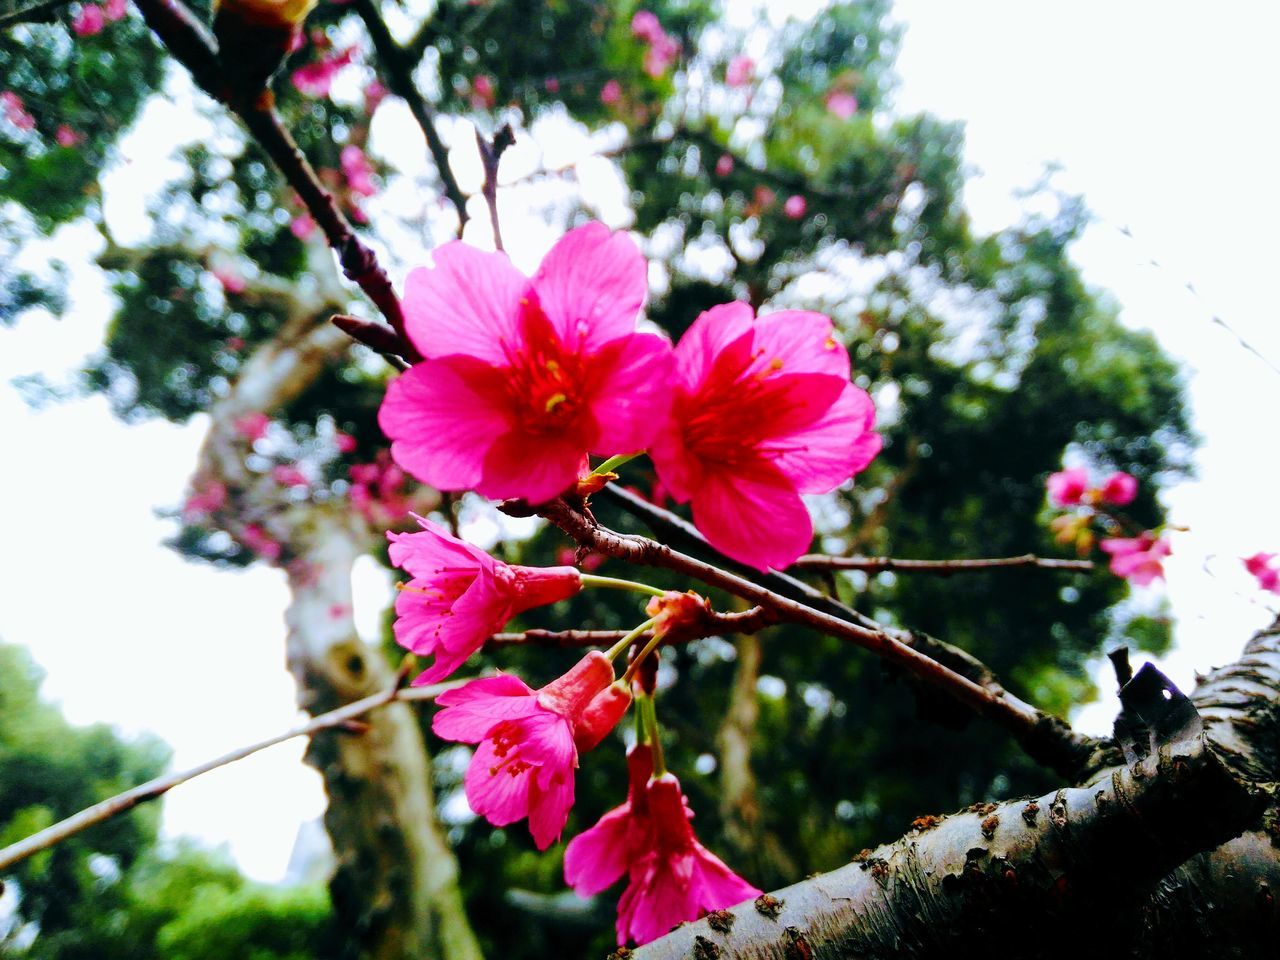 flower, nature, tree, growth, fragility, beauty in nature, no people, day, low angle view, outdoors, pink color, petal, branch, freshness, close-up, blooming, flower head, sky